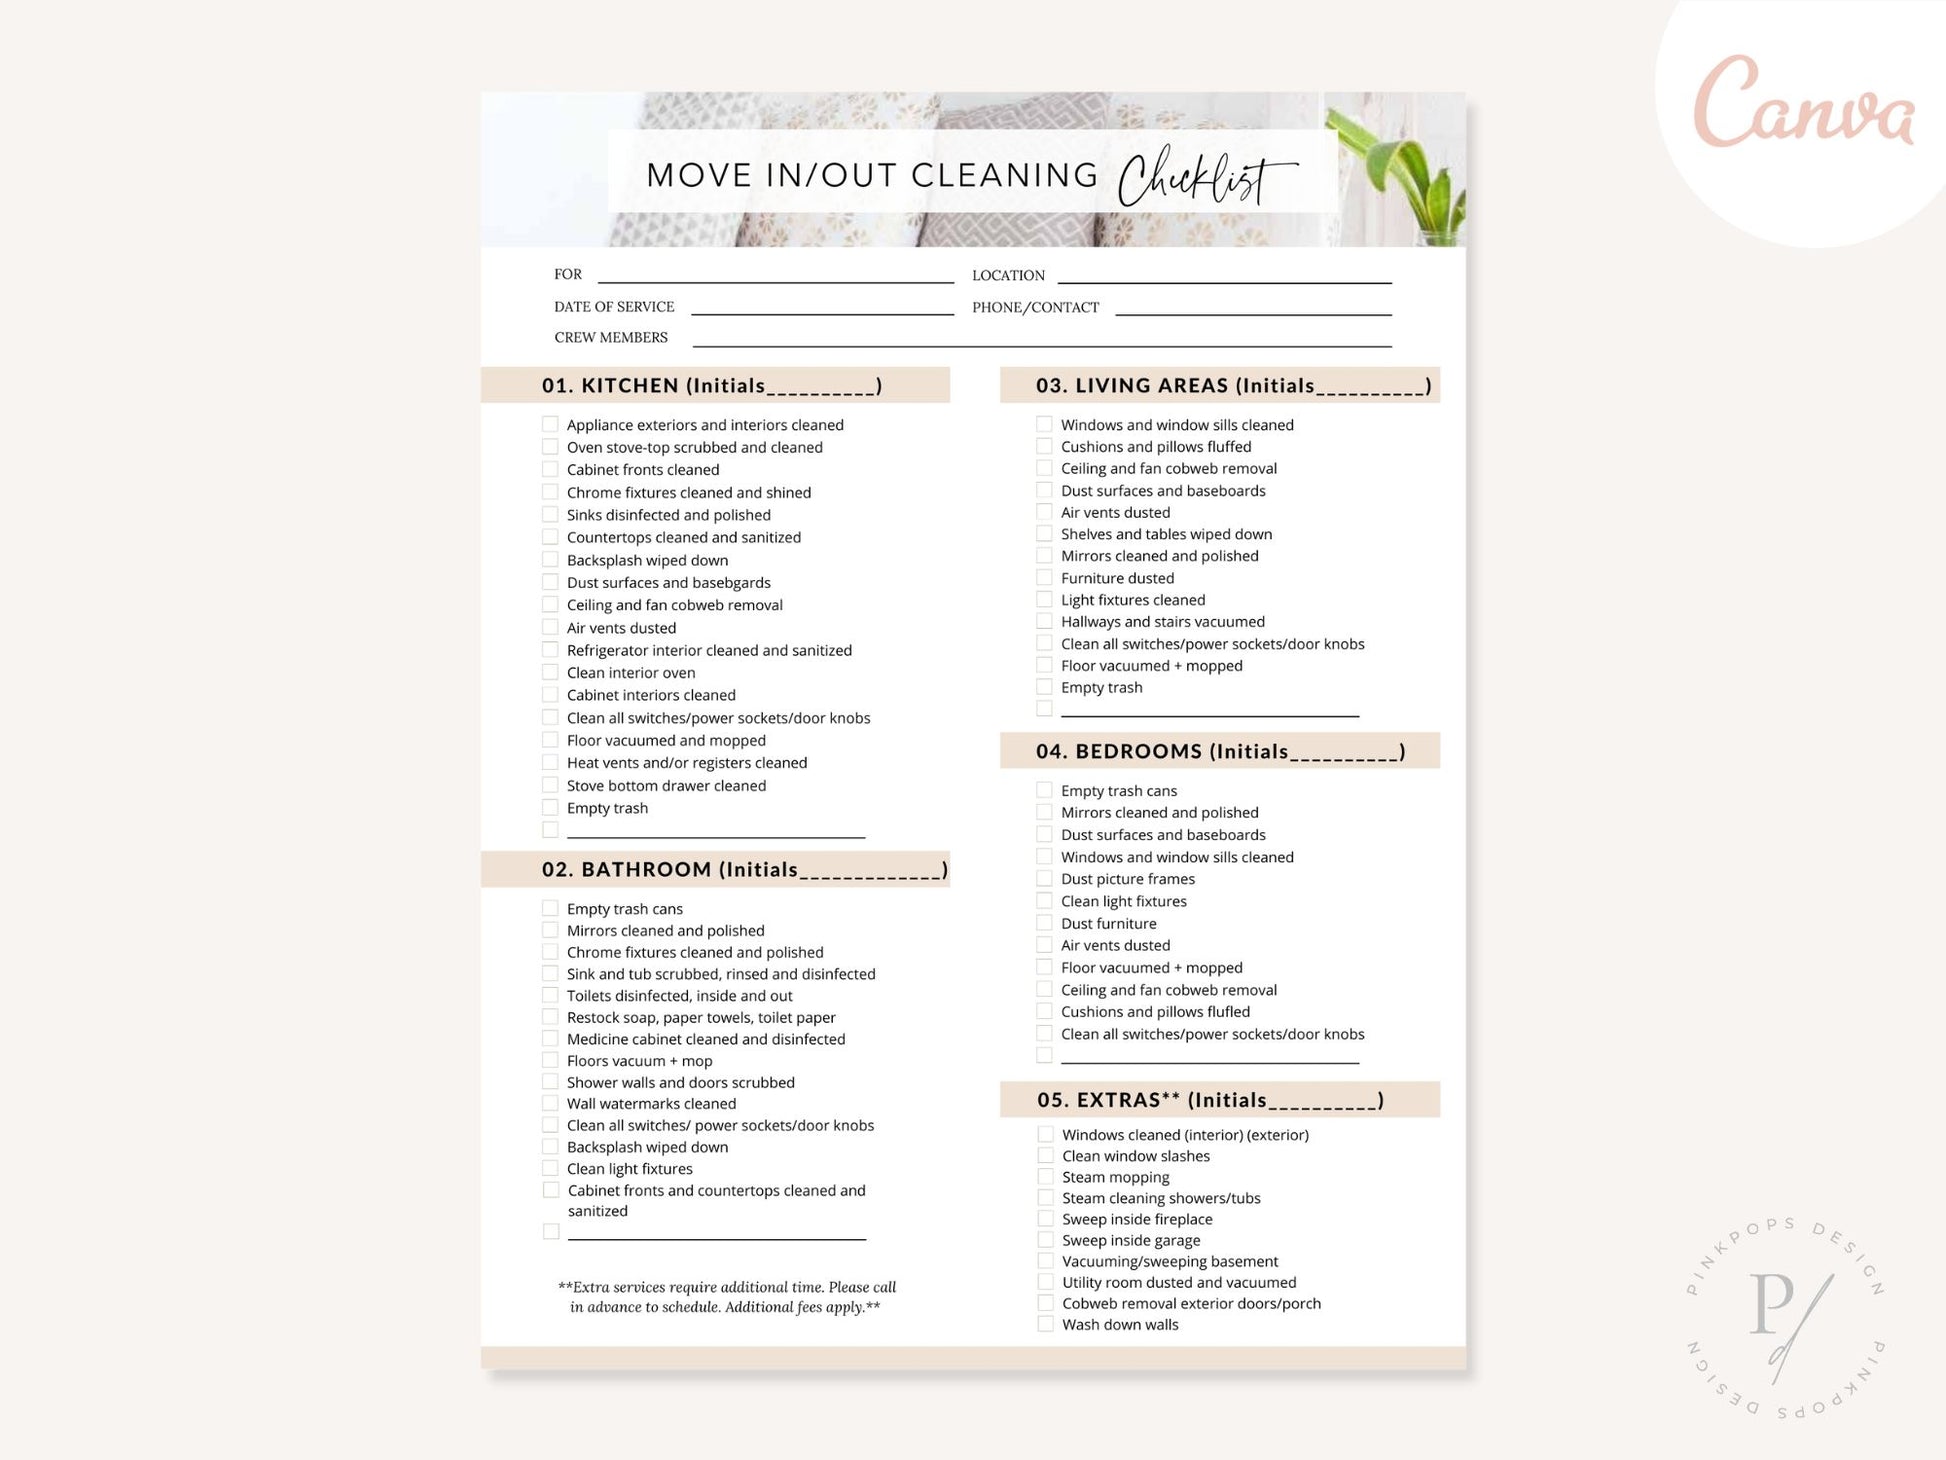 Move In and Out Cleaning Checklist - Editable template for ensuring a thorough and organized cleaning process during move-ins and move-outs, facilitating seamless transitions and a fresh start.